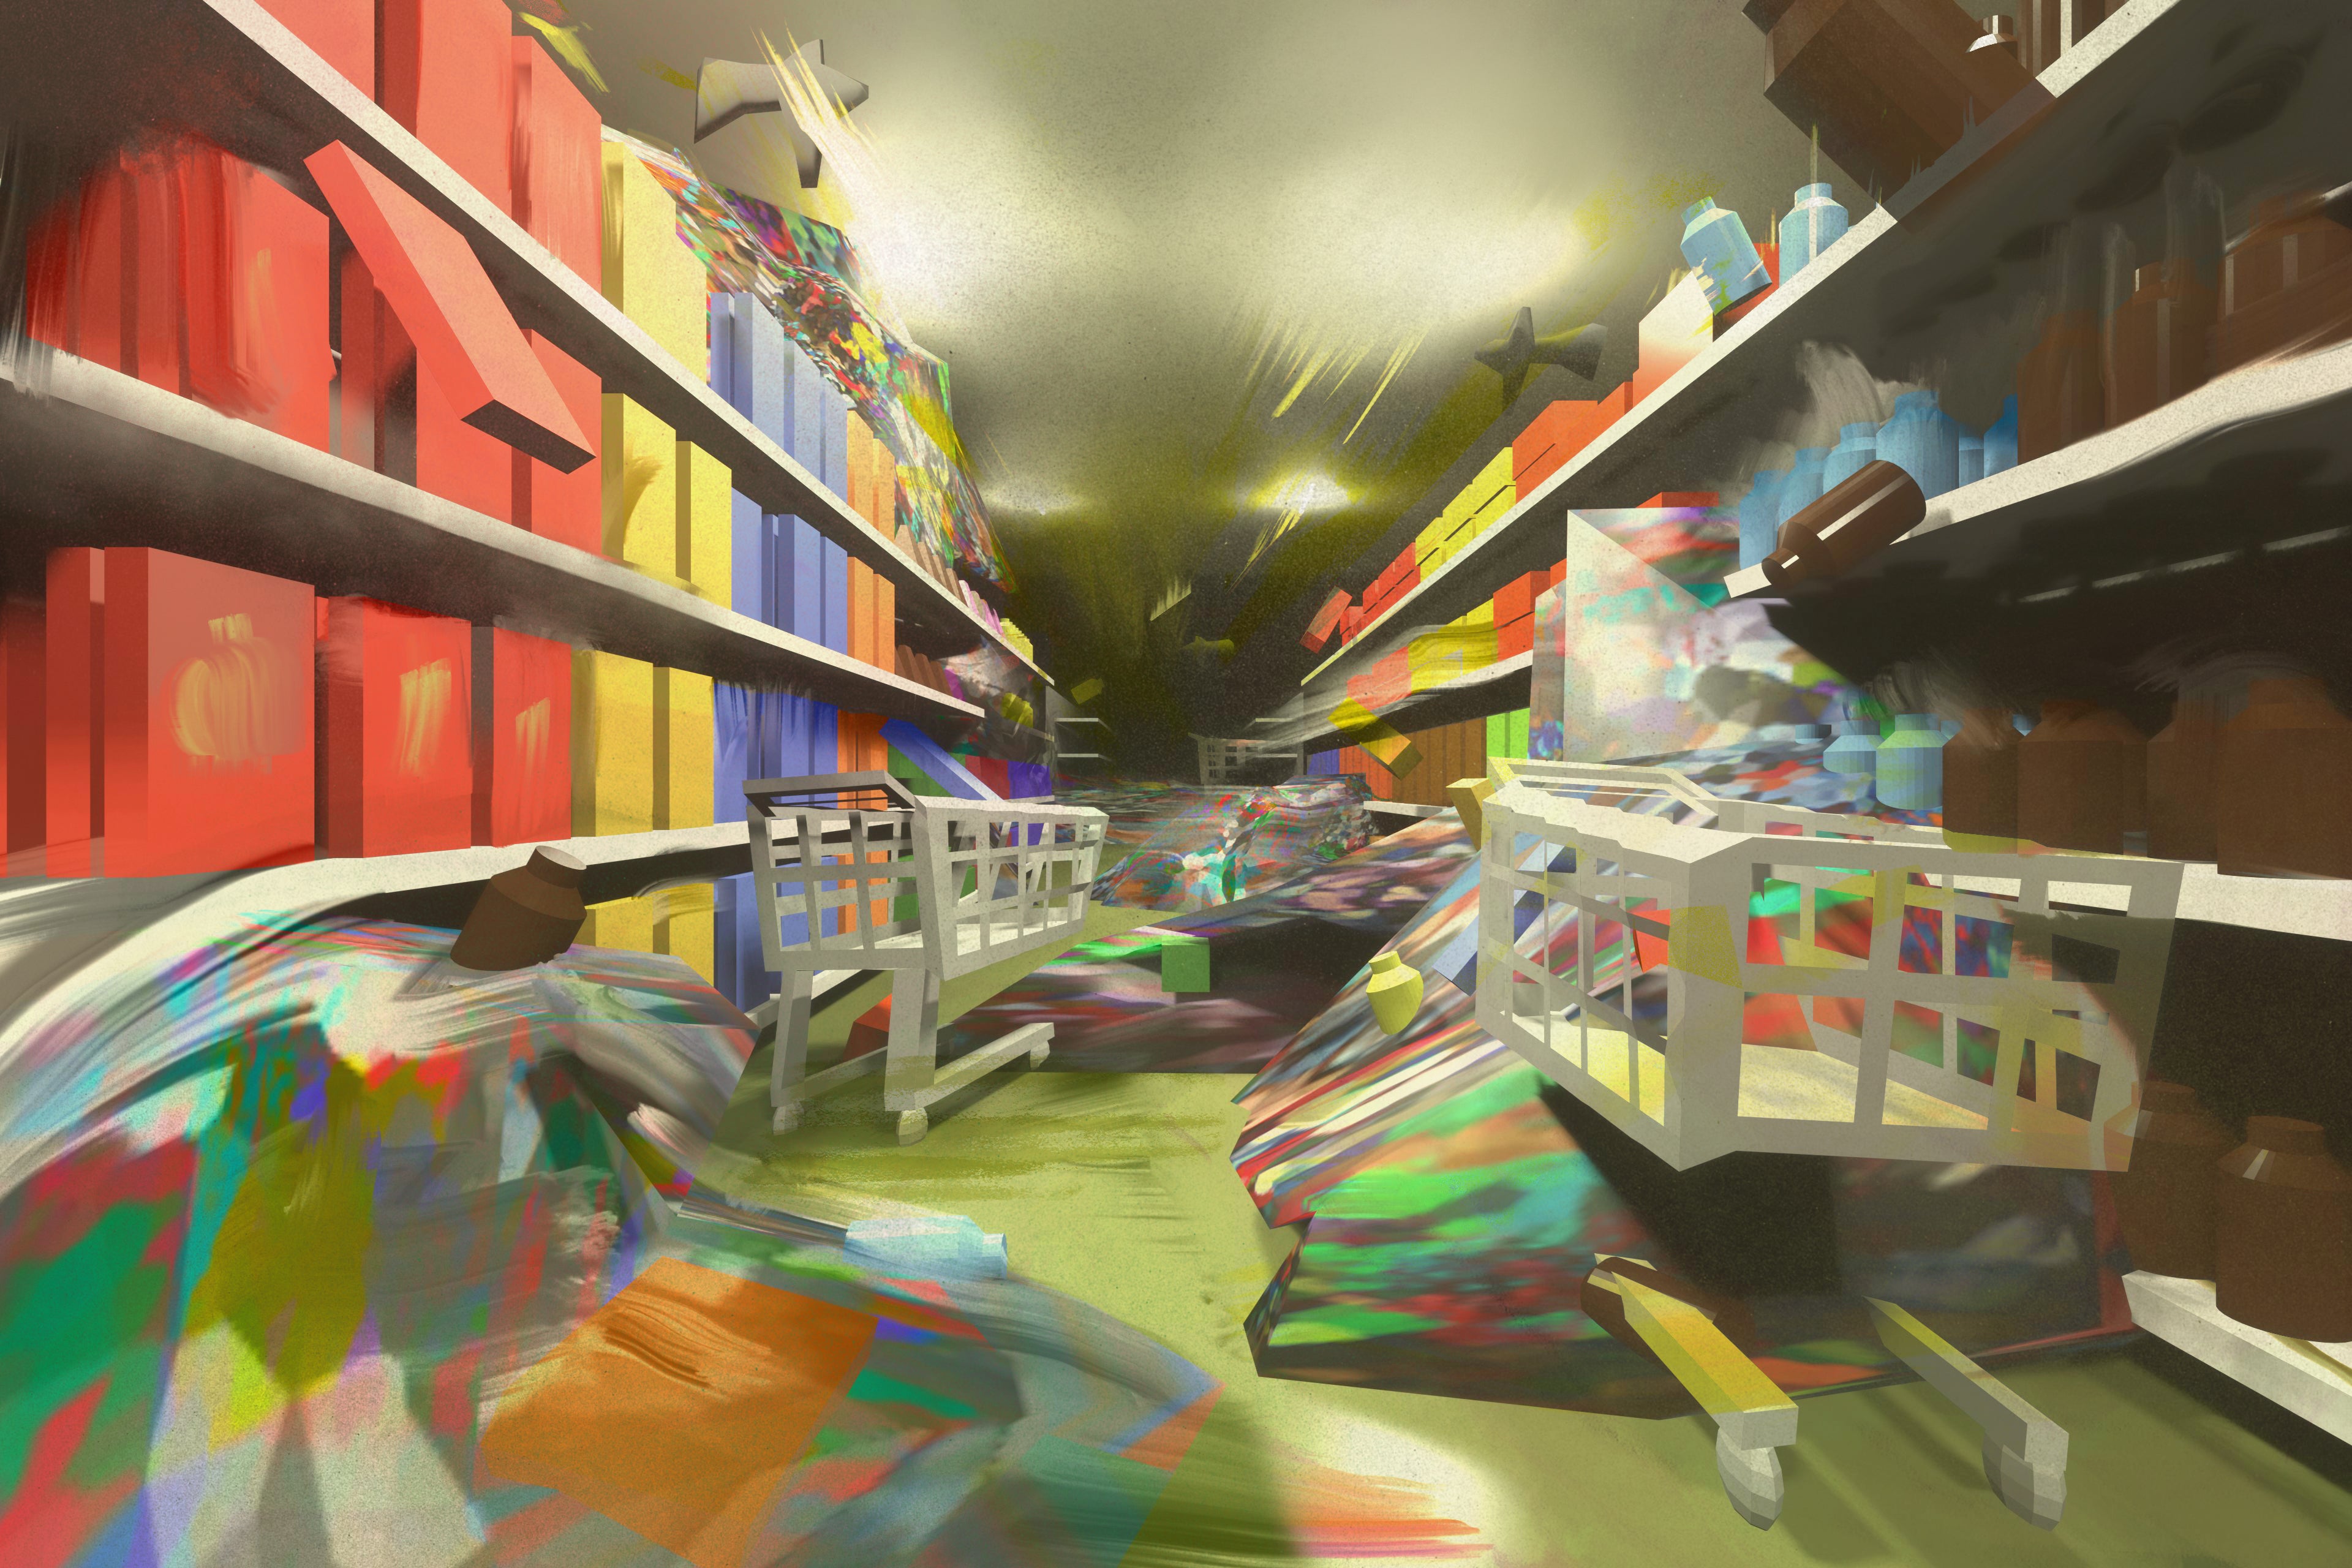 A brightly colored aisle of a store with various objects jumping off the shelves into shopping carts.